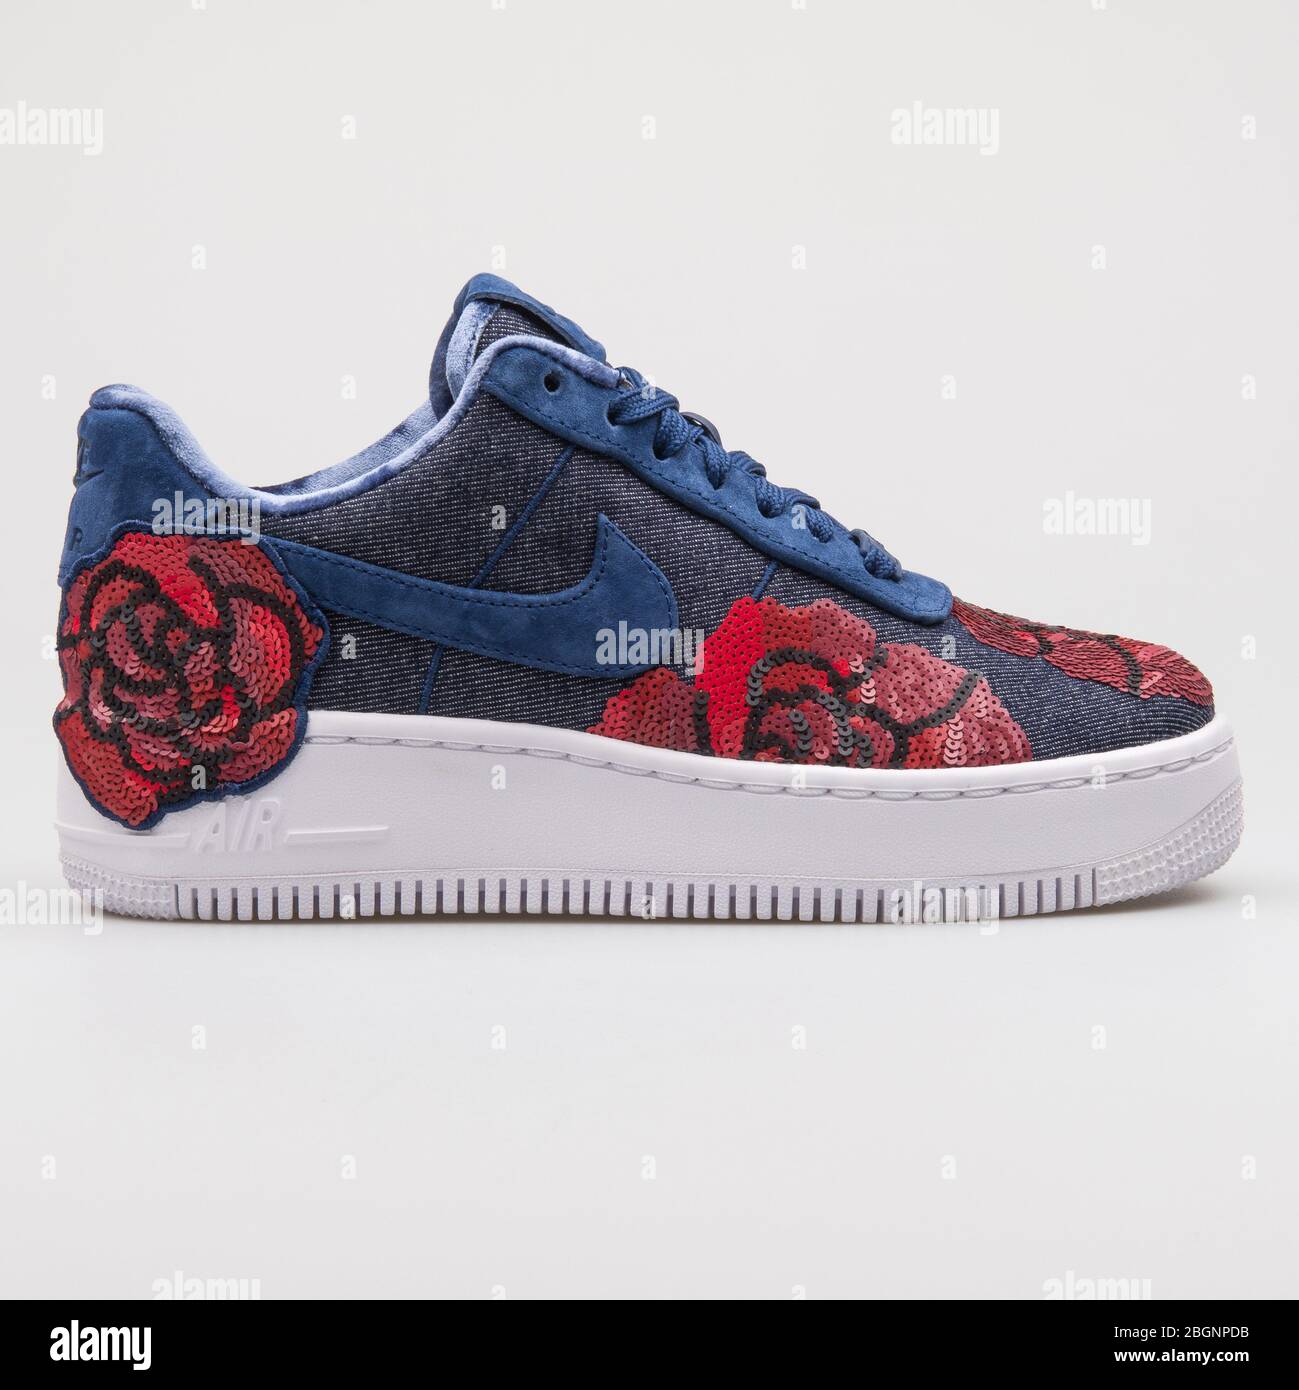 VIENNA, AUSTRIA - AUGUST 22, 2017: Nike Air Force 1 Upstep LX blue, black  and red rose sneaker on white background Stock Photo - Alamy